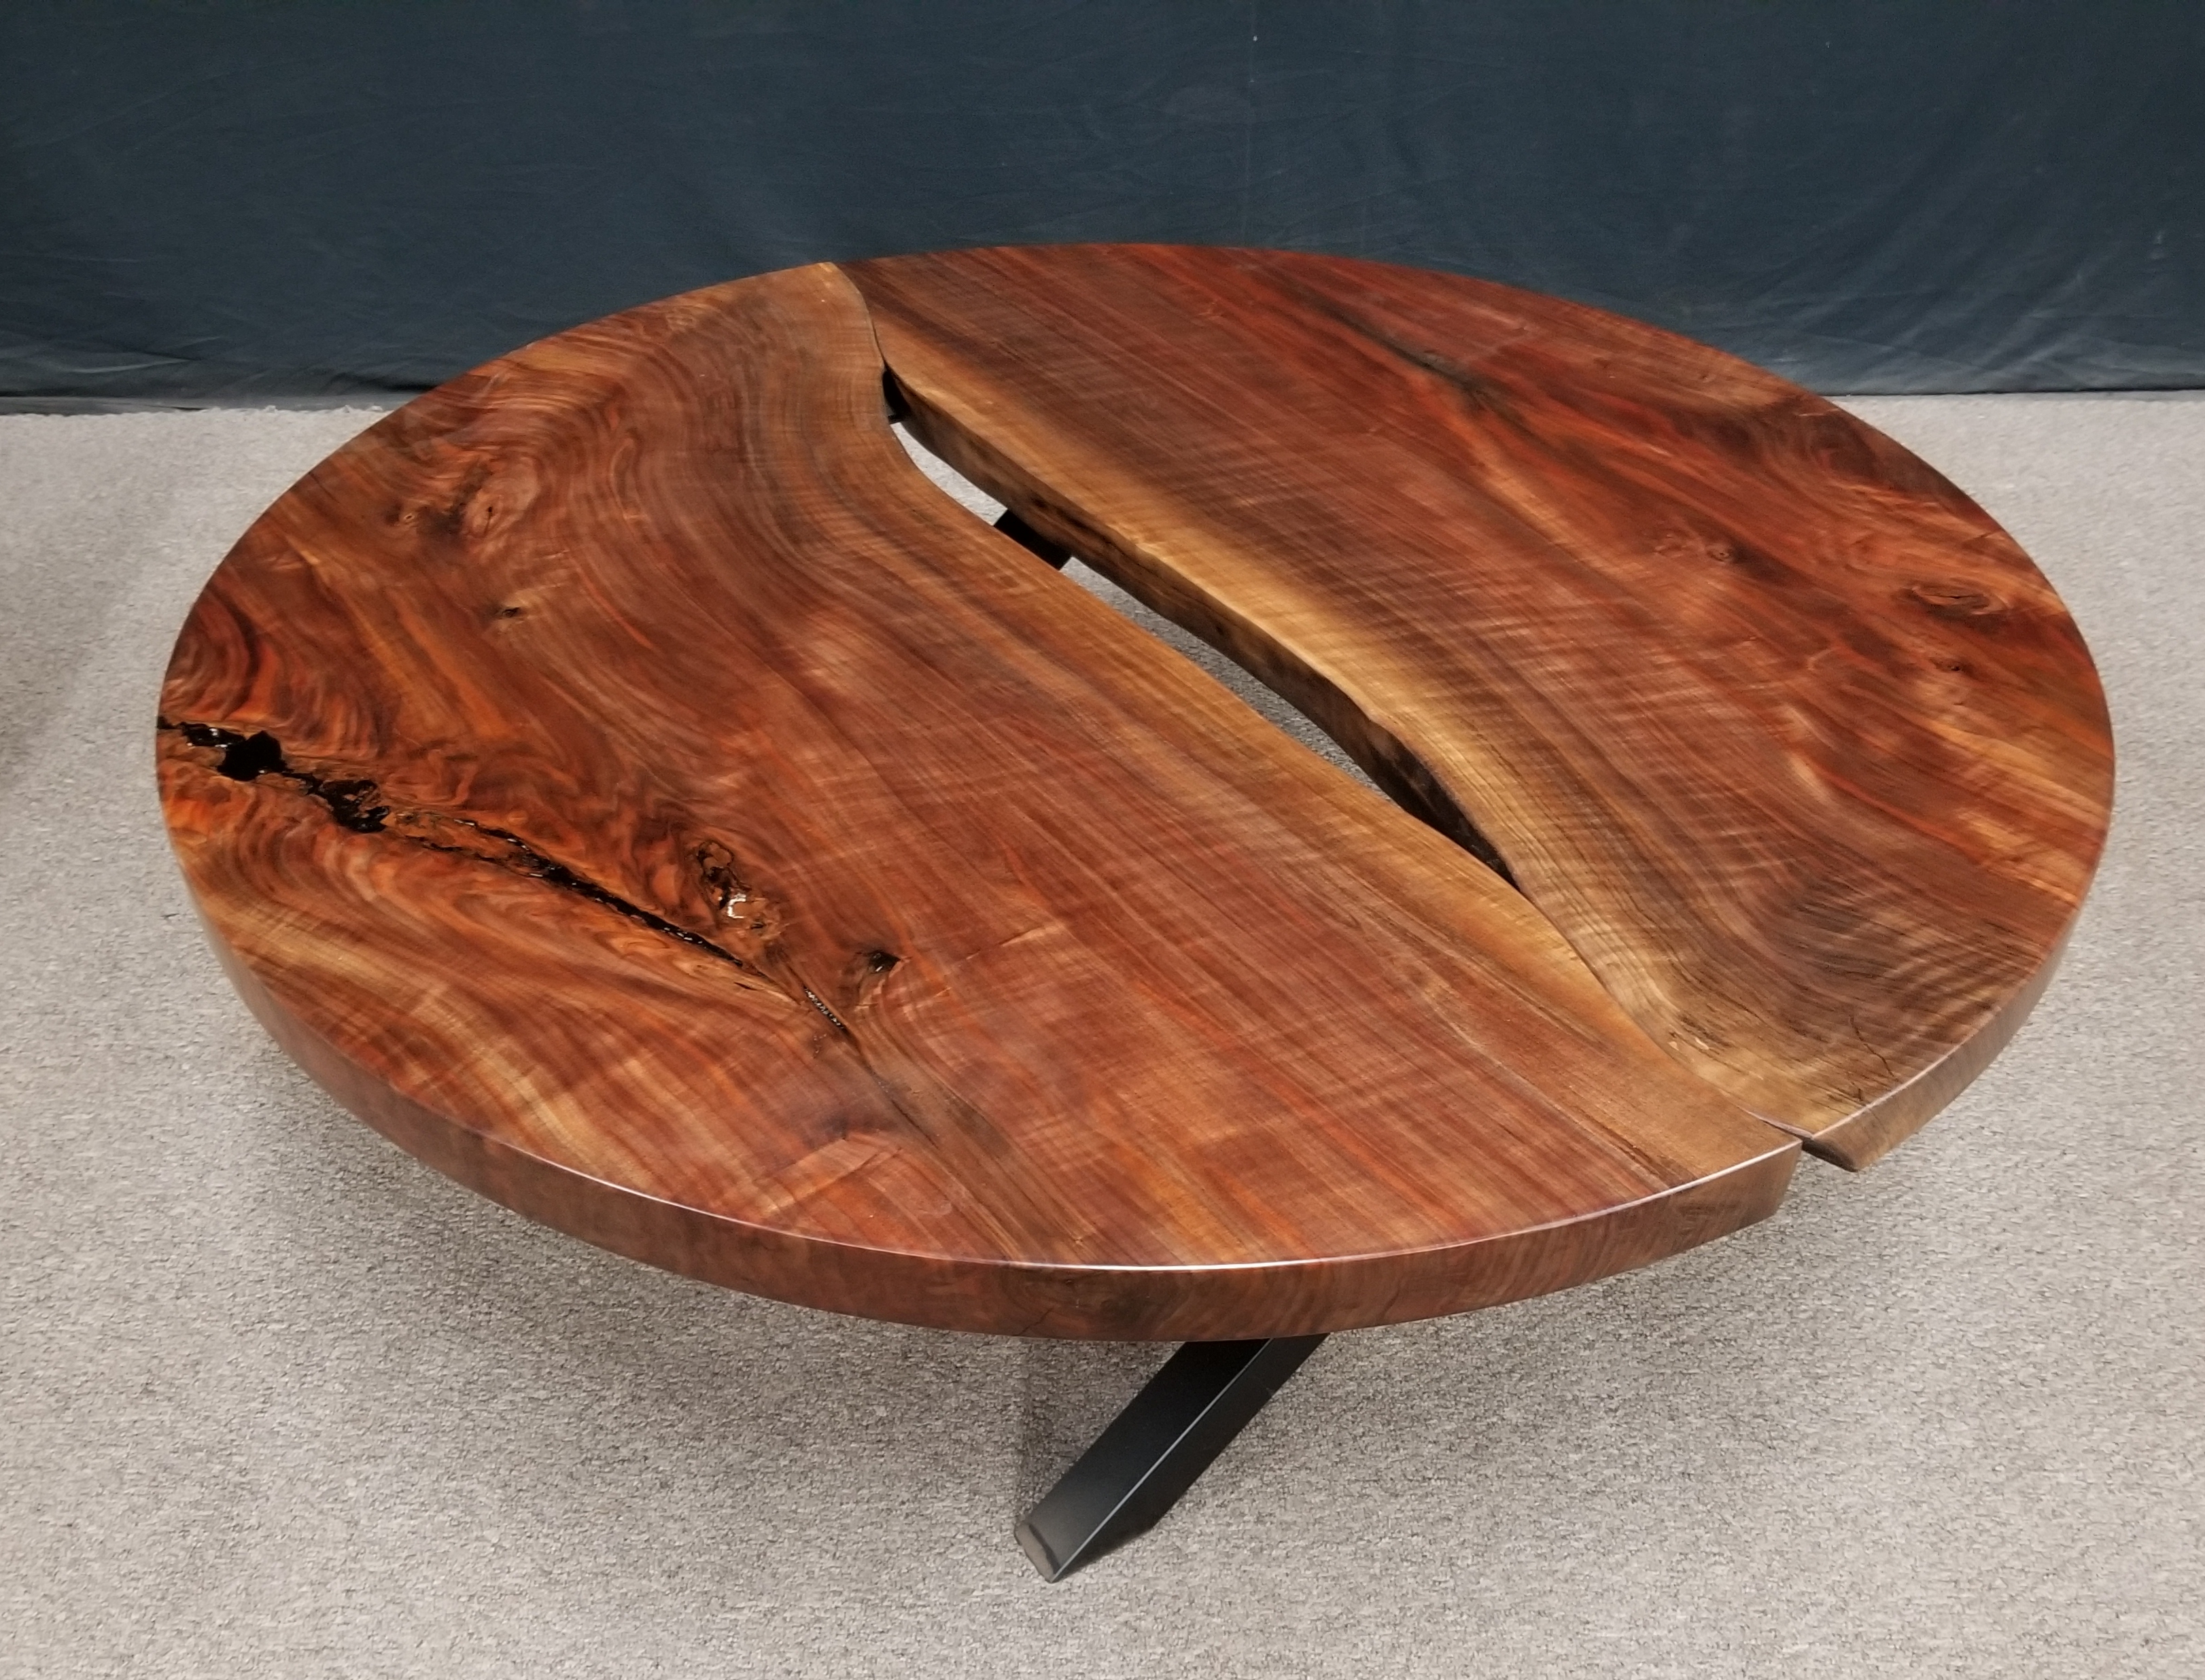 China Modern Round Wooden Coffee Table With X Base For Coffee Shop Use China Wooden Table Coffee Shop Table